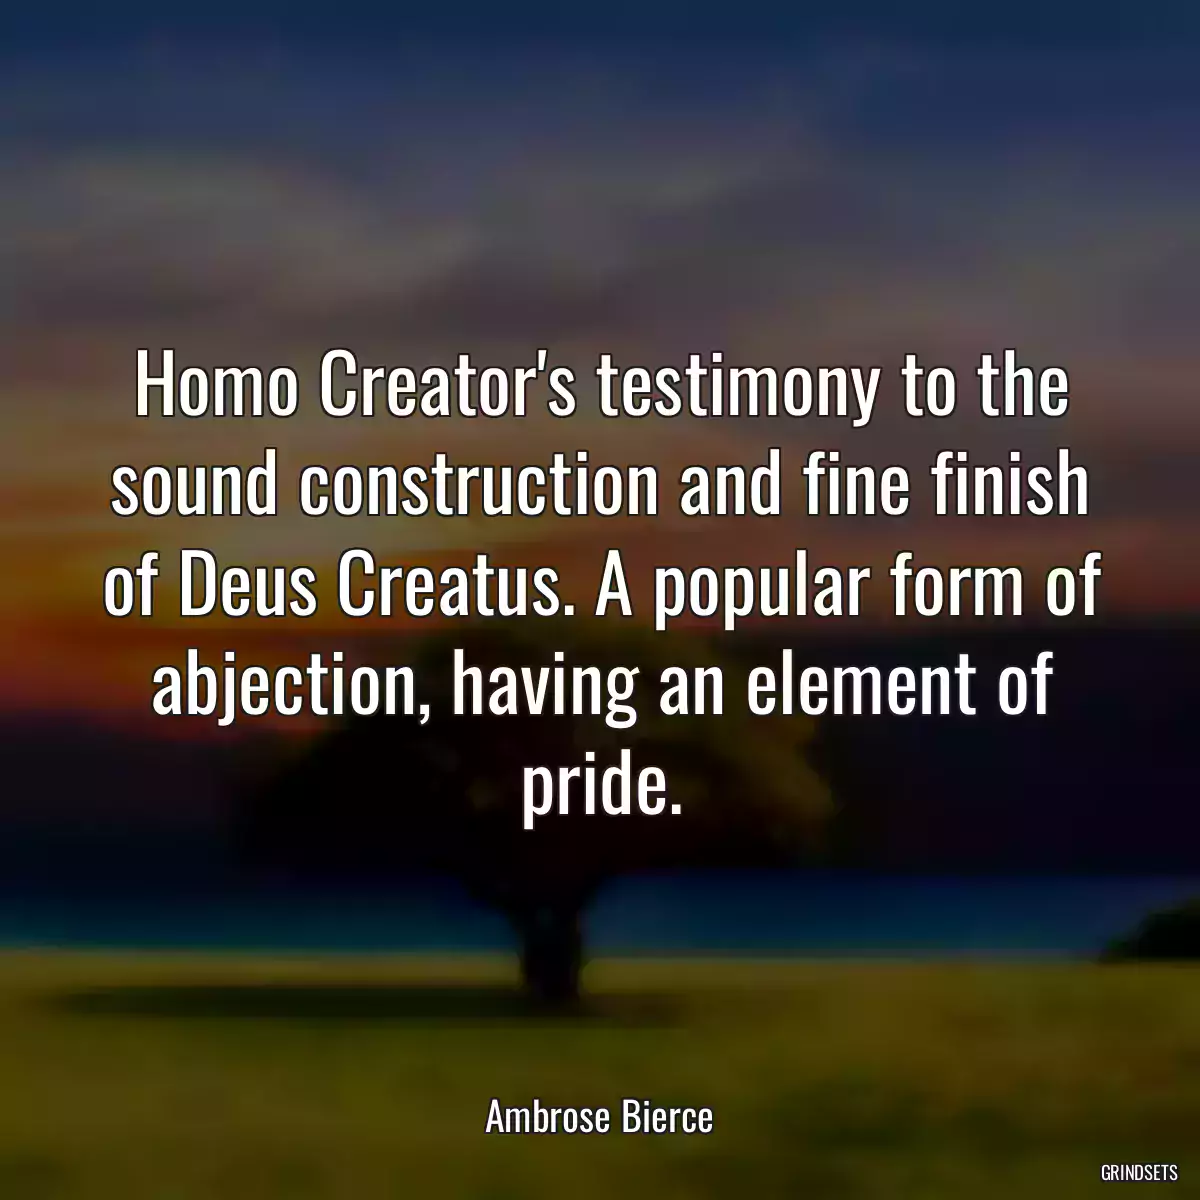 Homo Creator\'s testimony to the sound construction and fine finish of Deus Creatus. A popular form of abjection, having an element of pride.